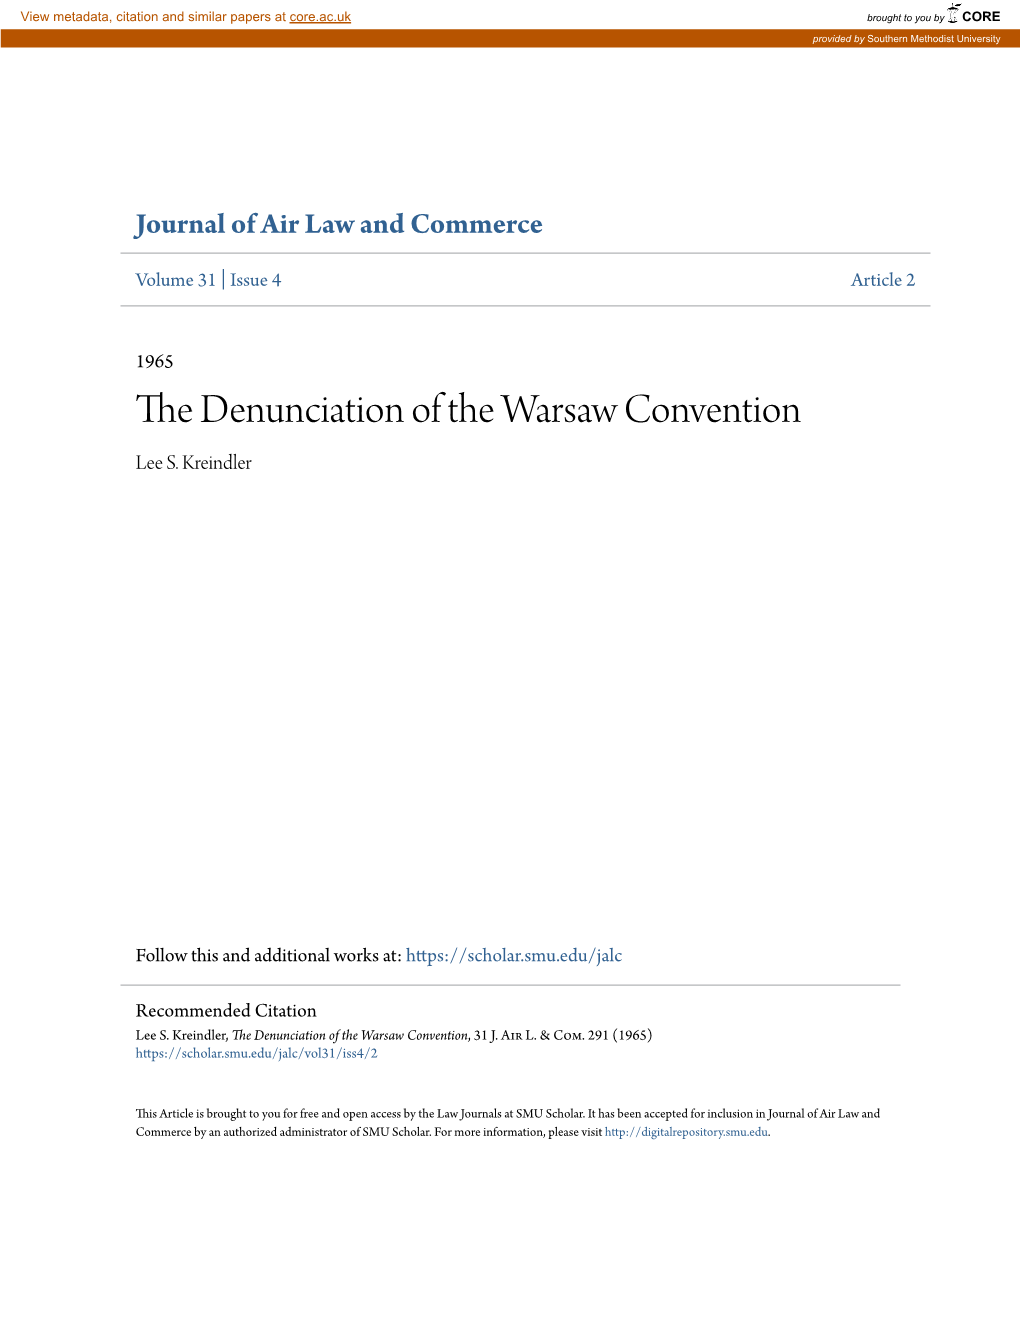 The Denunciation of the Warsaw Convention, 31 J